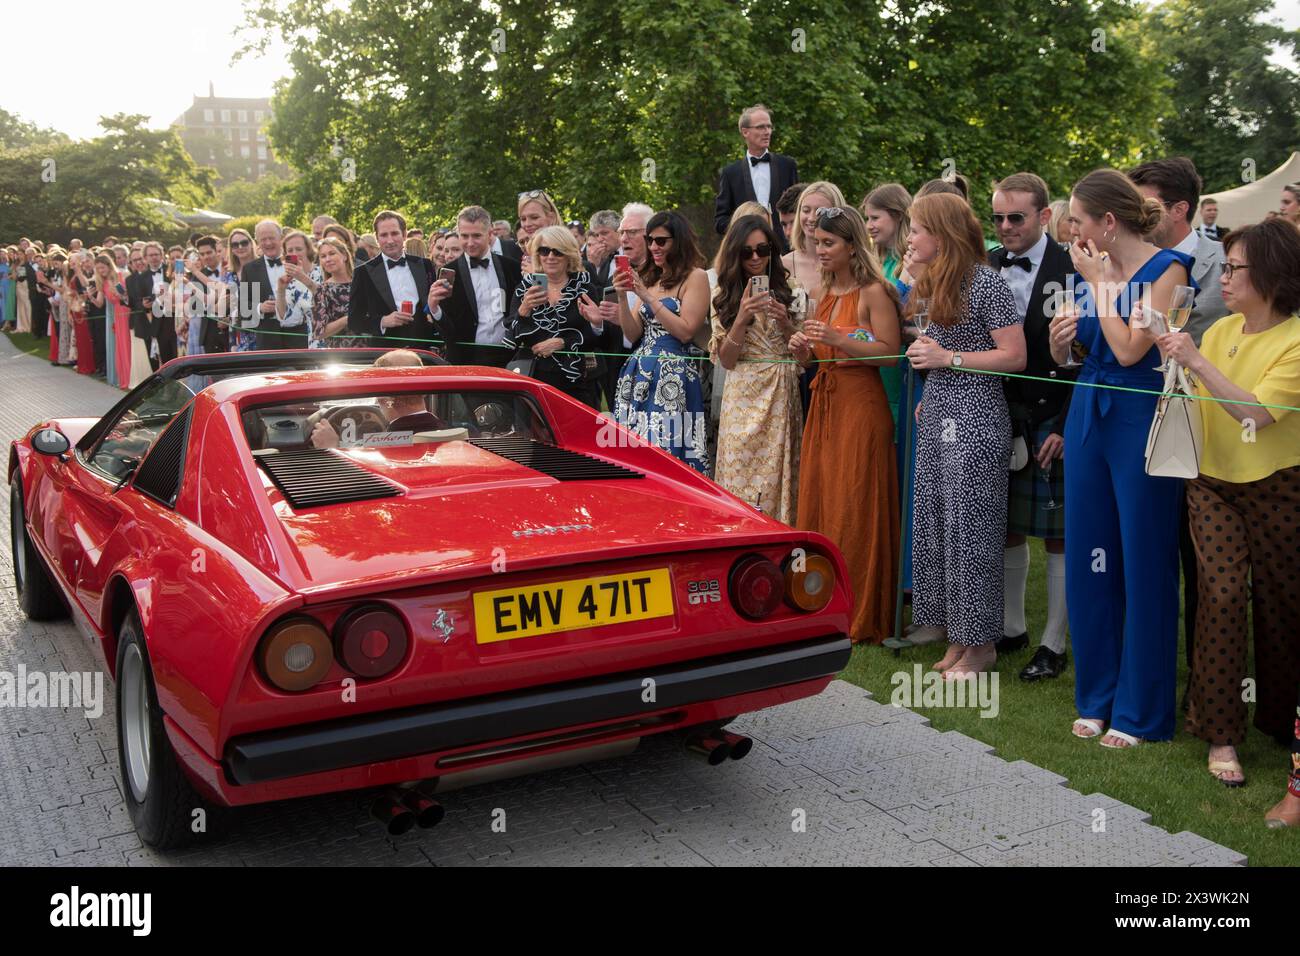 Wealthy London the Hurlingham Club annual summer garden party, members watching a red Ferrari 308 GTS in the Concourse d'Elégance. Members show off their vintage and classic cars in the Concourse d'Elégance, ie owners drive the cars around the grounds of the club. Fulham, London, England 11th June 2022 UK 2020s HOMER SYKES Stock Photo